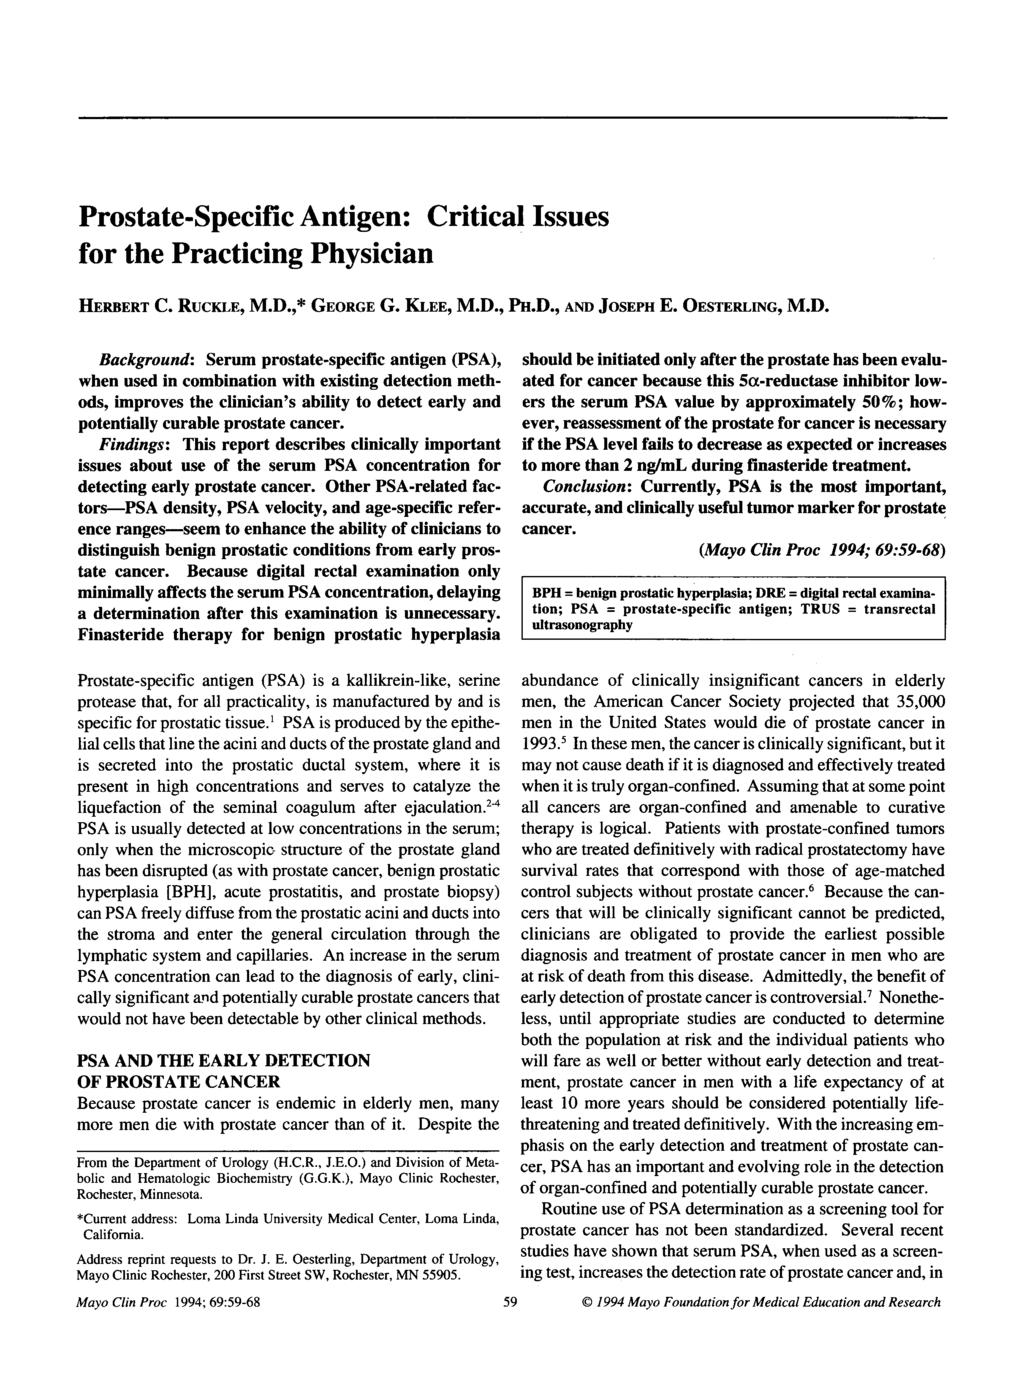 Subject Review Prostate-Specific Antigen: Critical Issues for the Practicing Physician HERBERT C. RUCKLE, M.D.